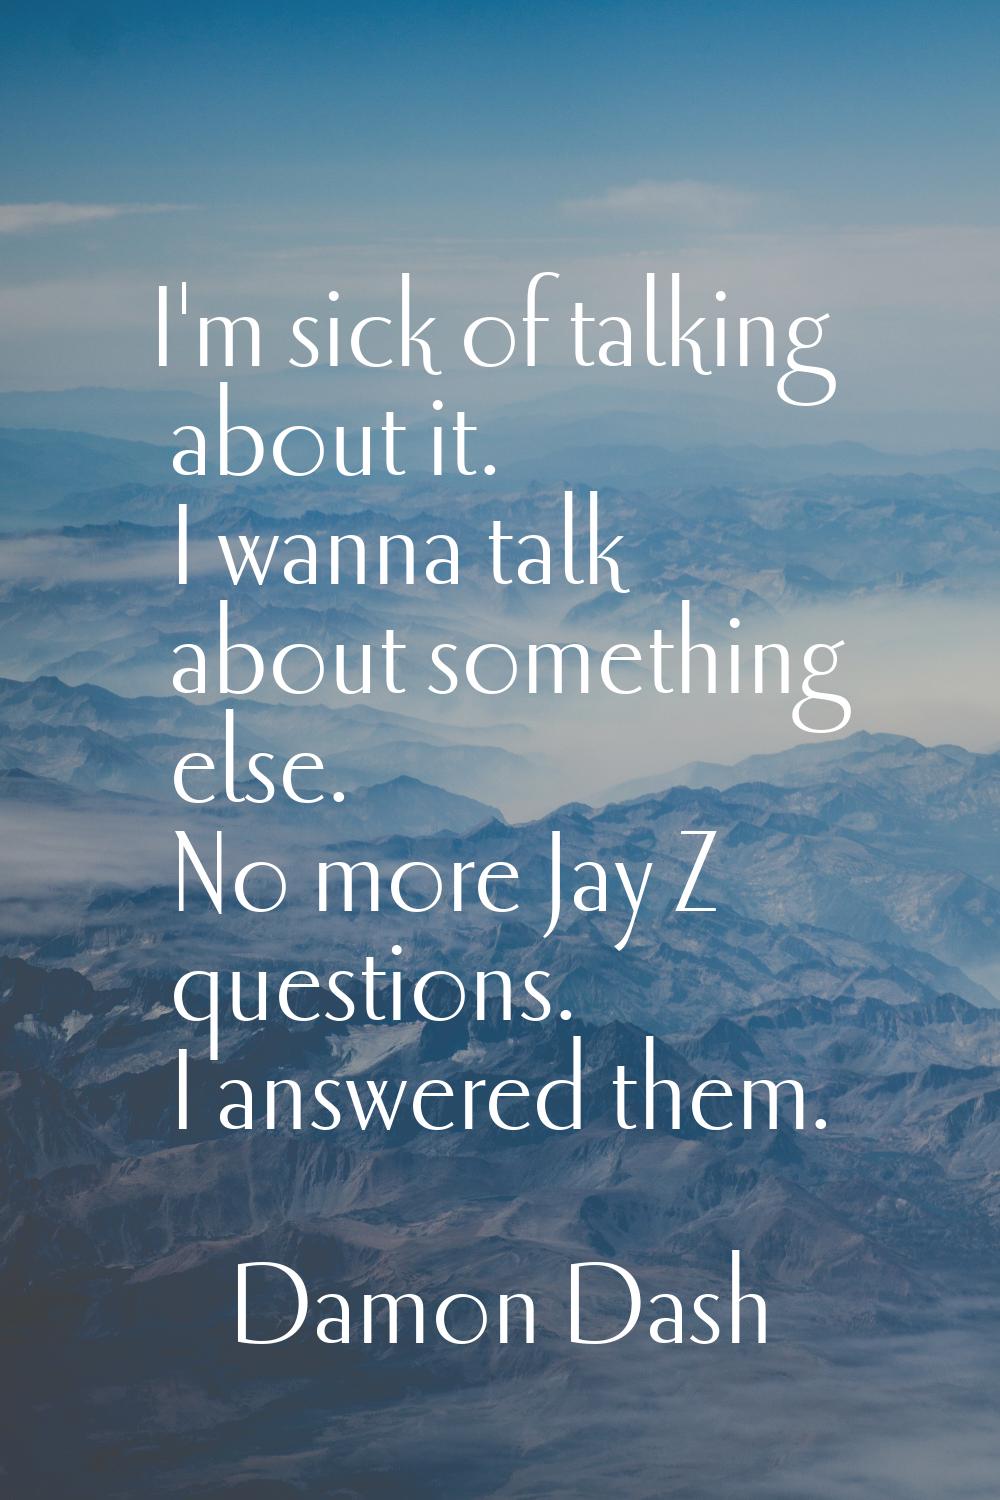 I'm sick of talking about it. I wanna talk about something else. No more Jay Z questions. I answere